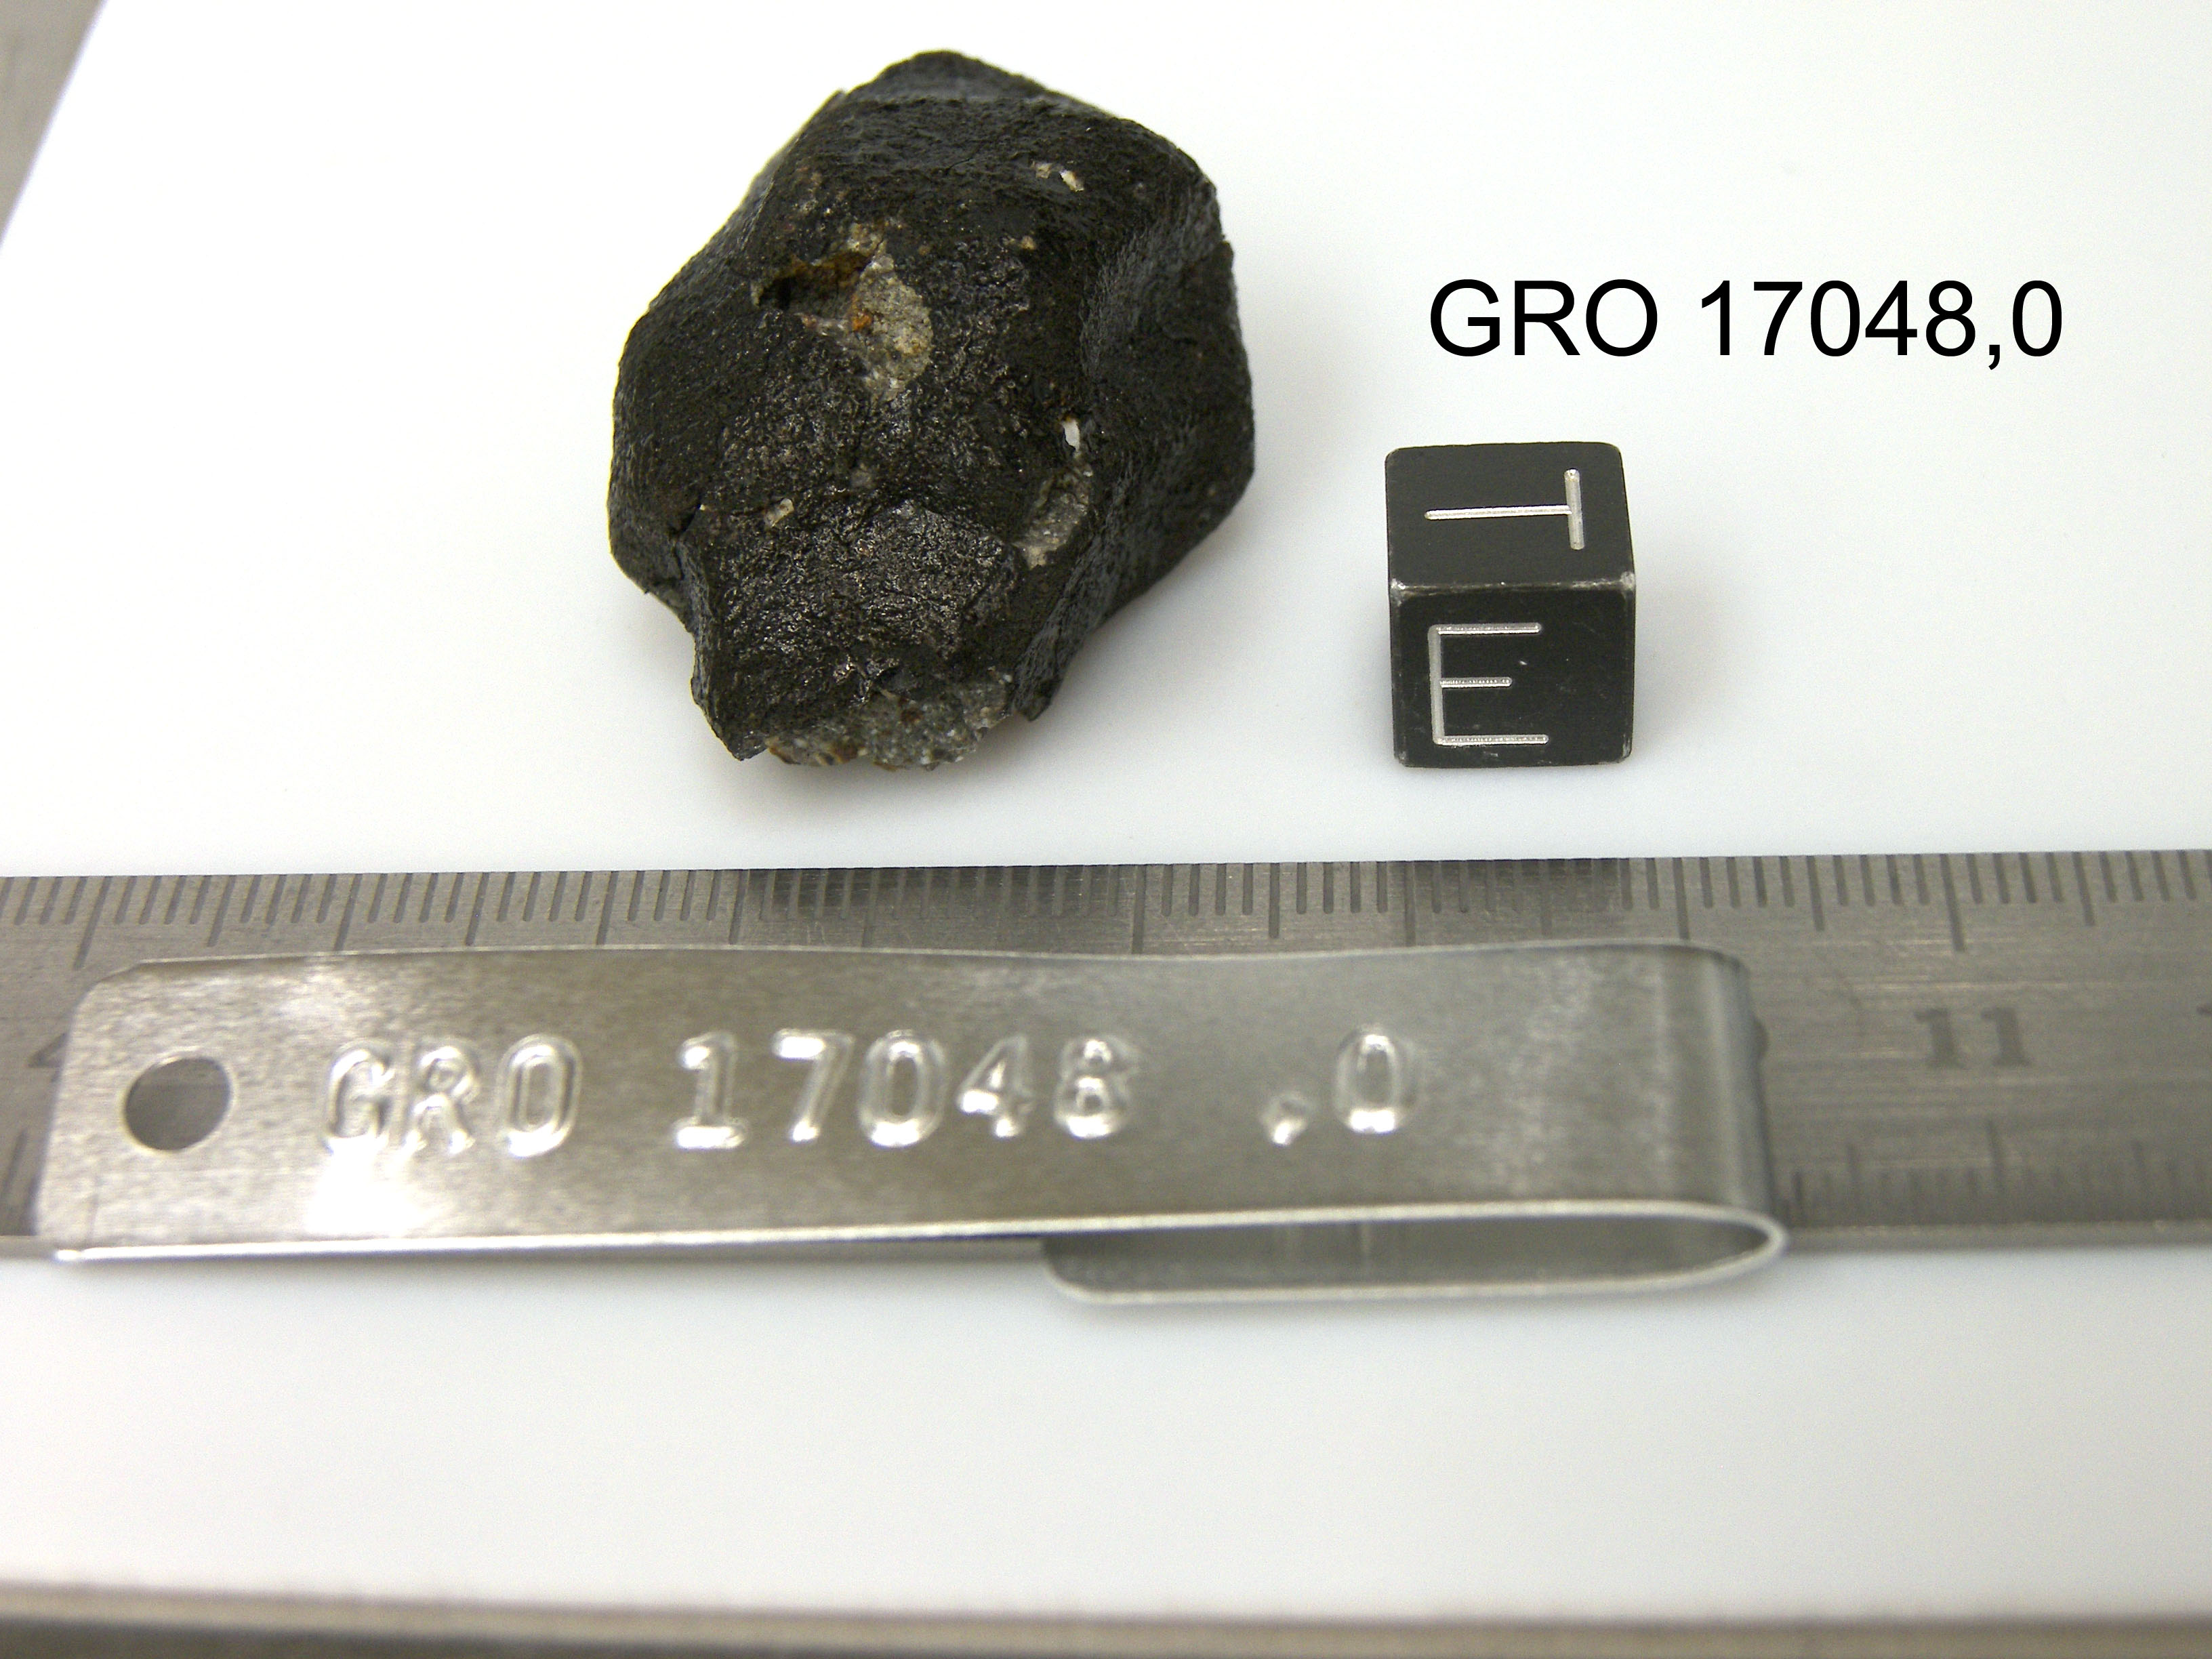 Lab Photo of Sample GRO 17048 Displaying East Orientation